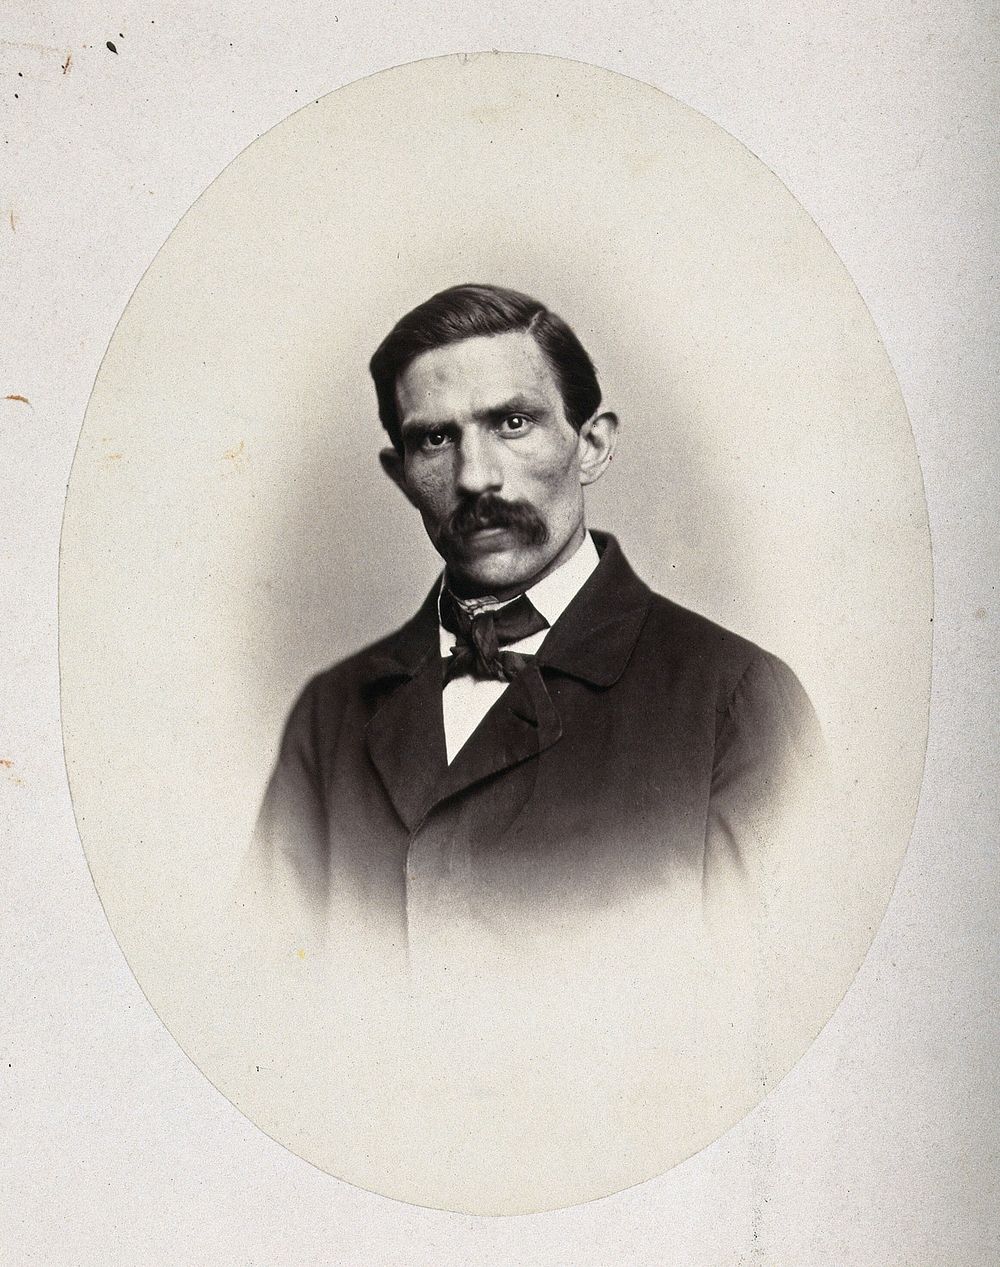 A man, head and shoulders. Photograph by L. Haase after H.W. Berend, c. 1865.